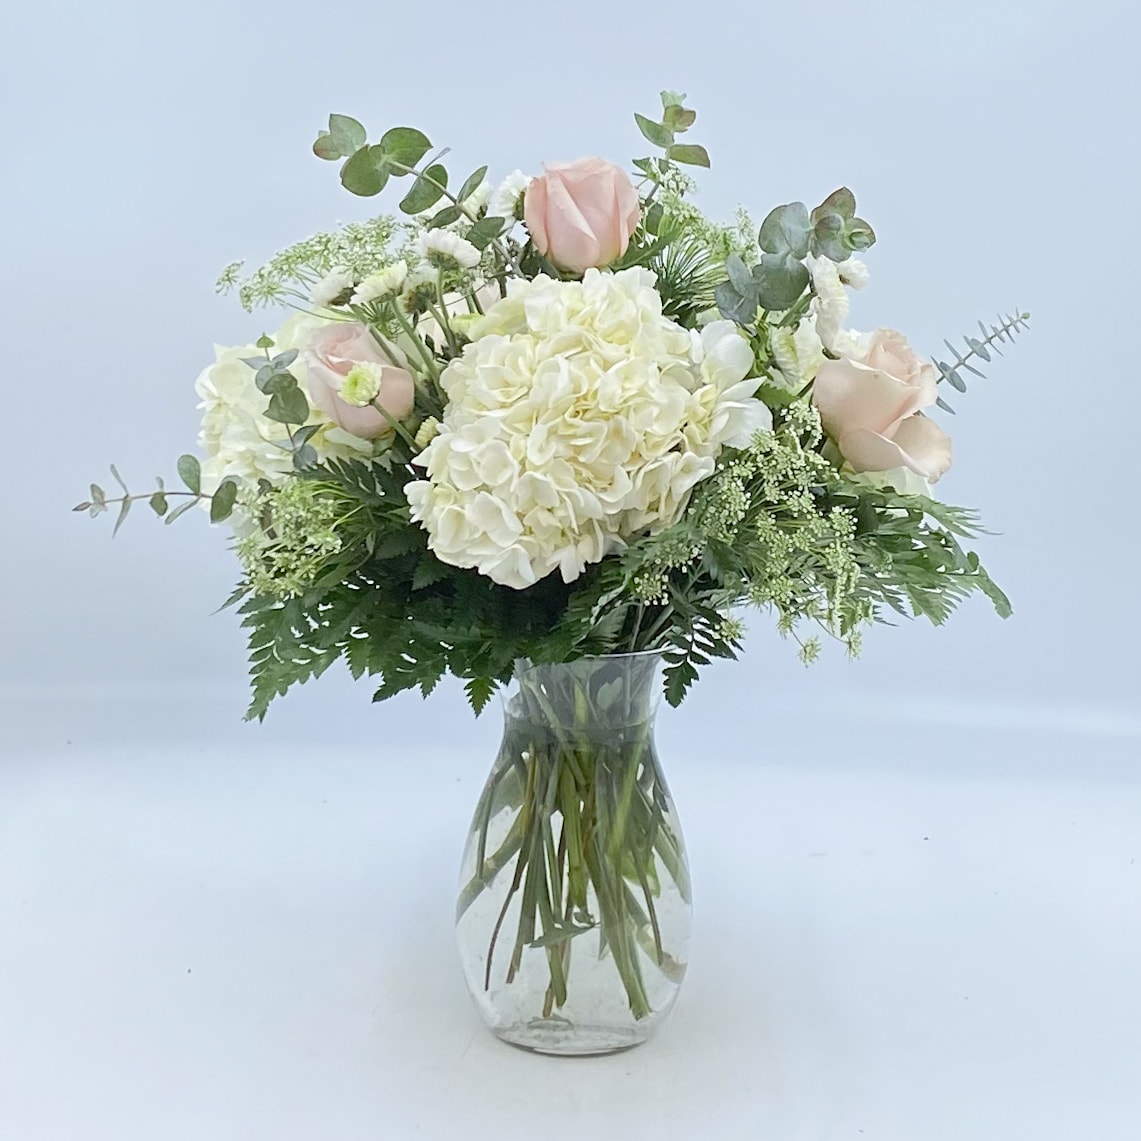 Briar Rose - Briar Rose is an all white and nude whimsical beauty that features a White Hydrangea, White Button Mums, Nude Quicksand Roses, Queen Anne's Lace and Mixed foliage arranged in a clear glass vase